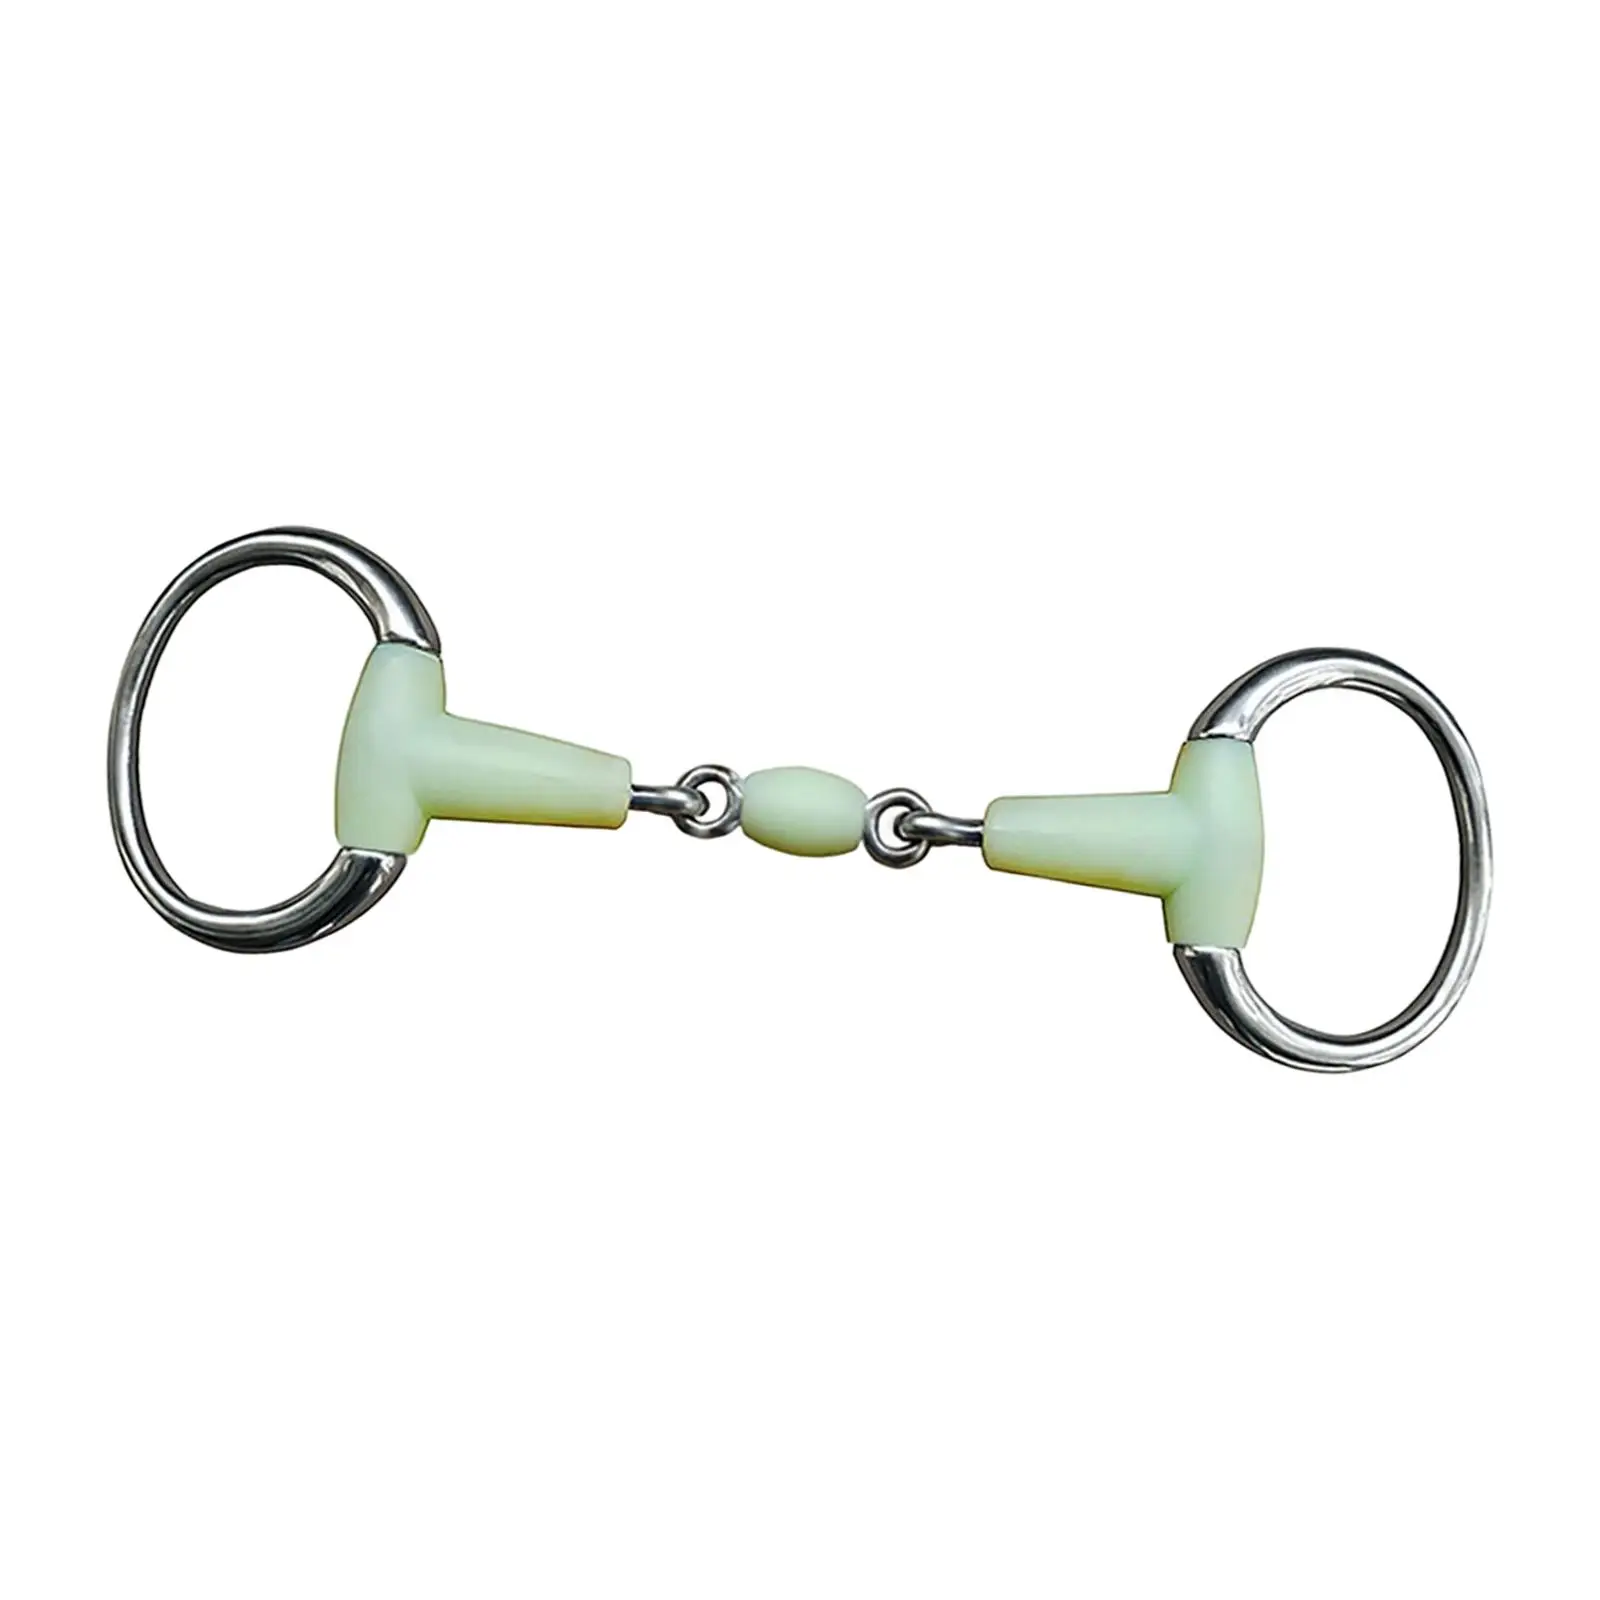 Horse Bit Mouth, Horse Training, Stainless Steel Wear Resistant Heavy Duty for Outdoor Horse Riding Gear